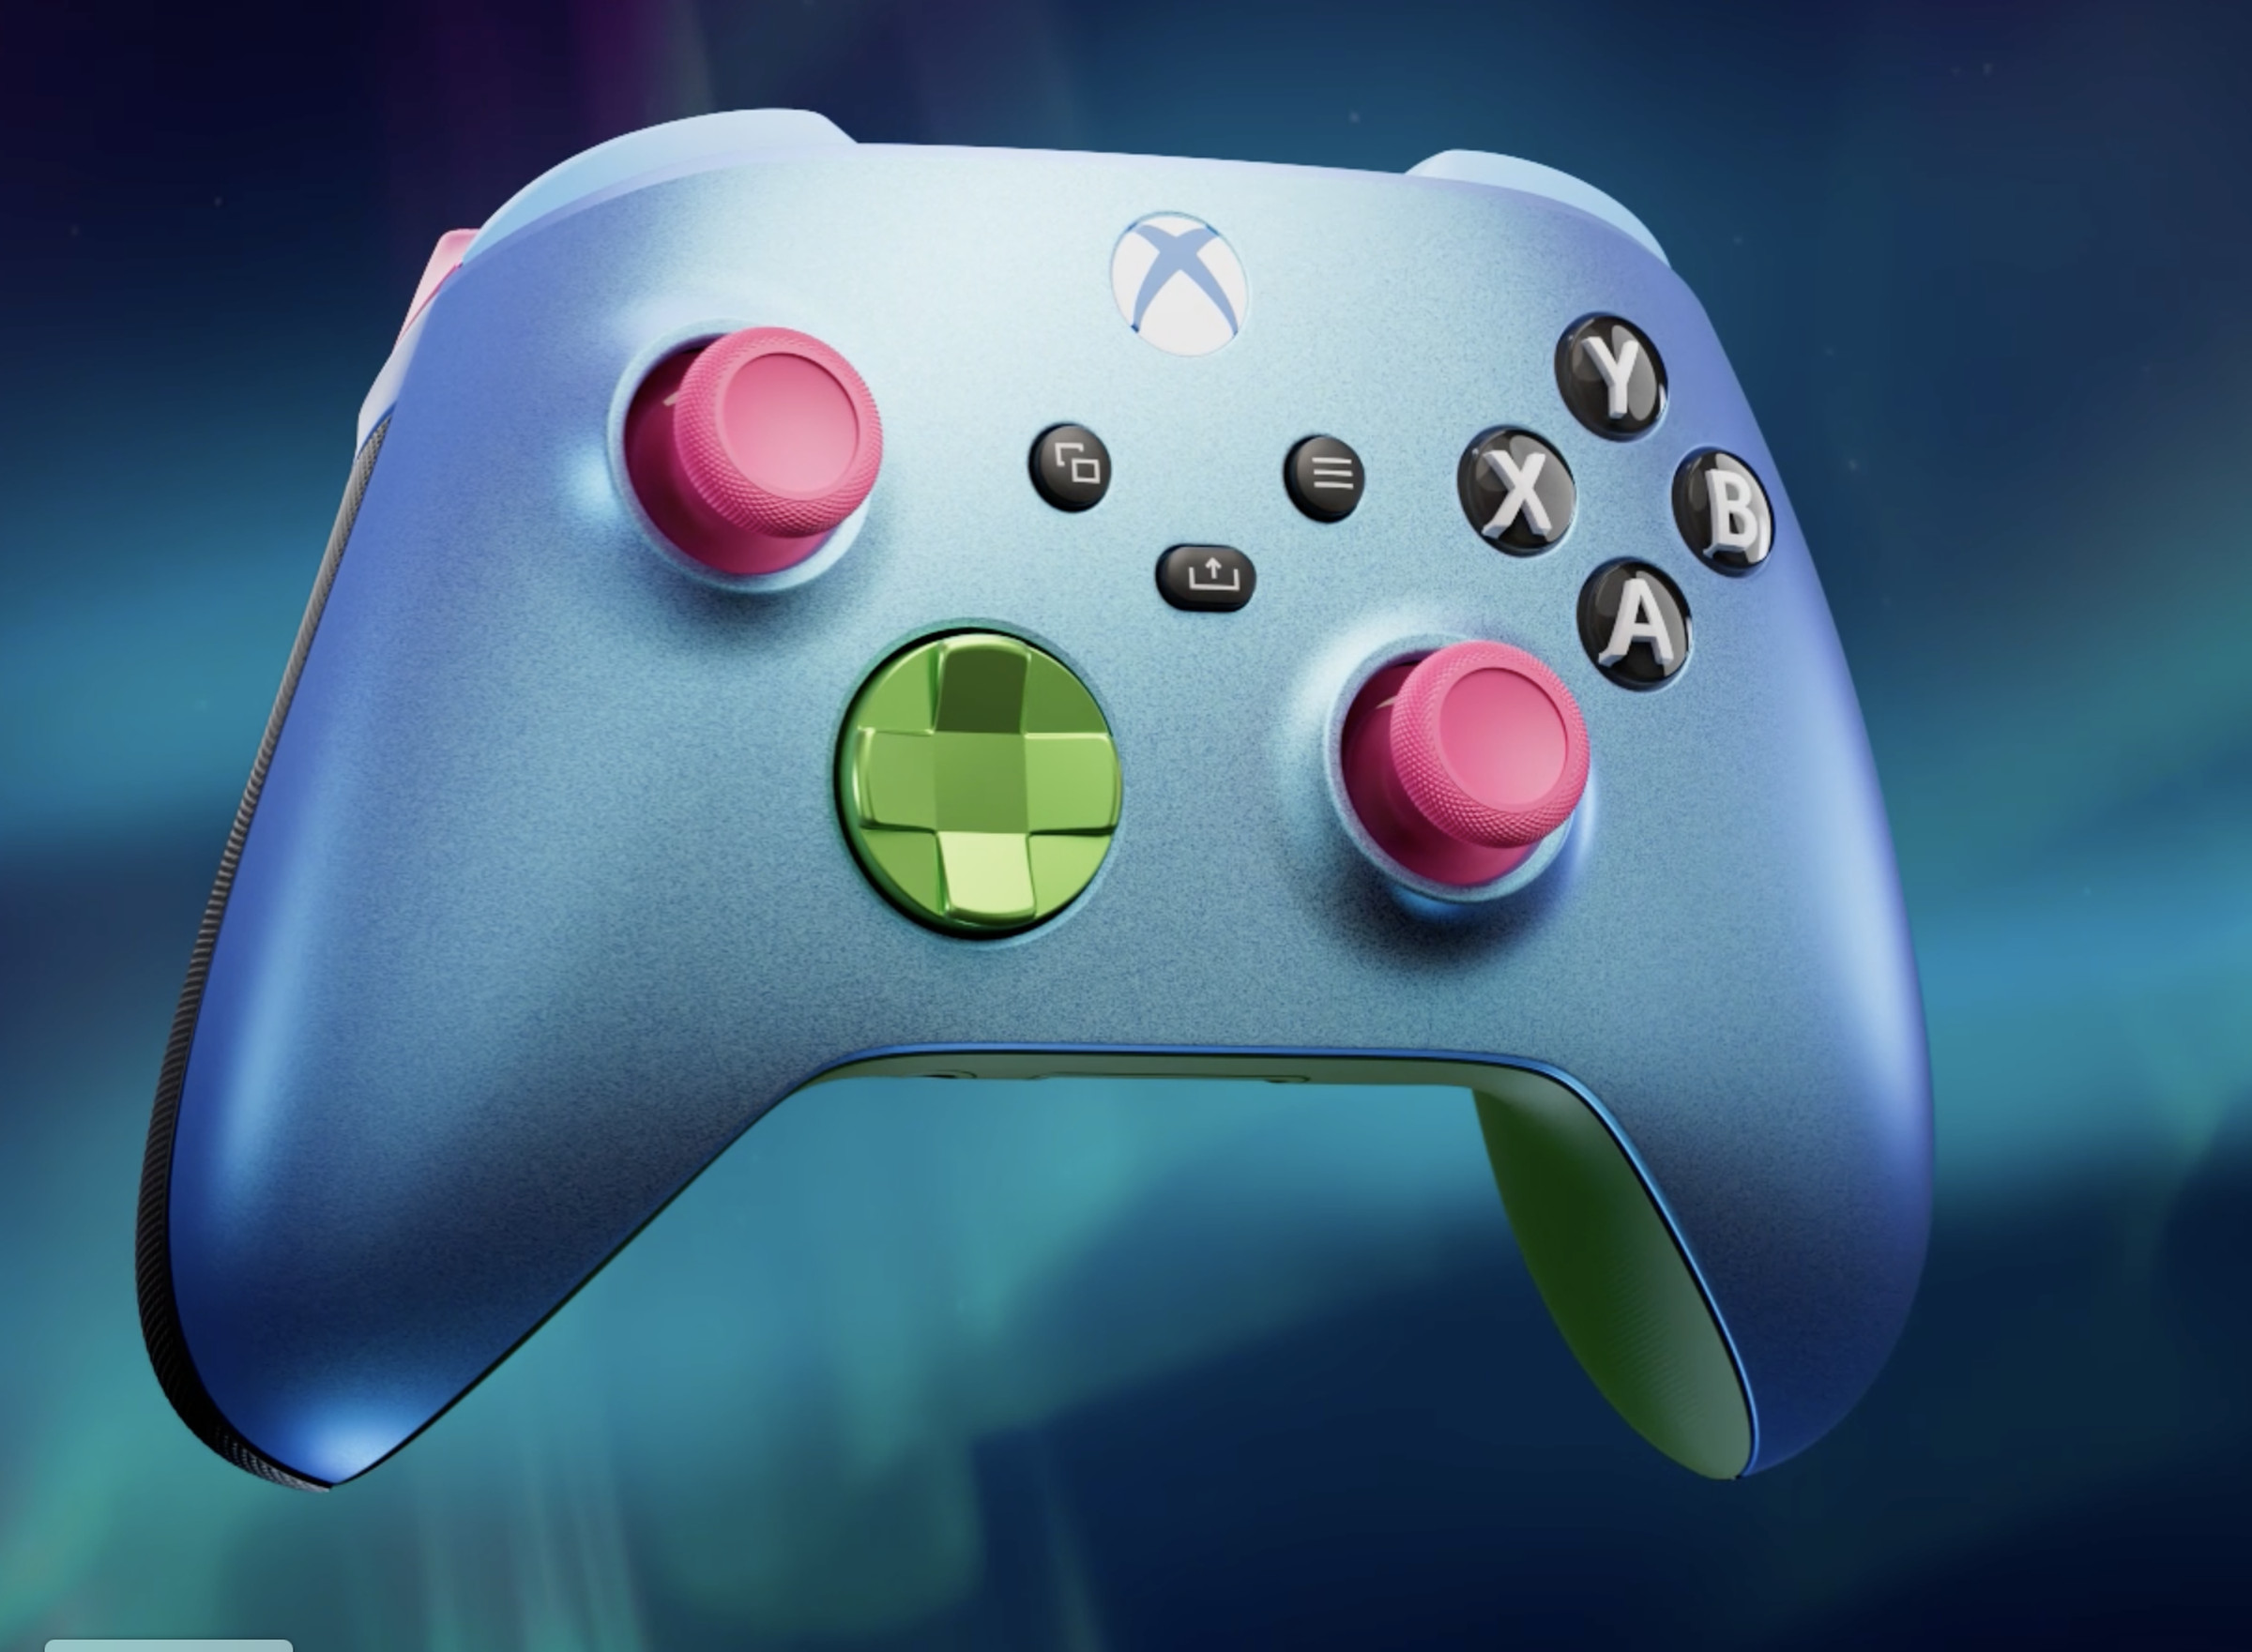 An Xbox controller sporting the Aqua Shift colorway.